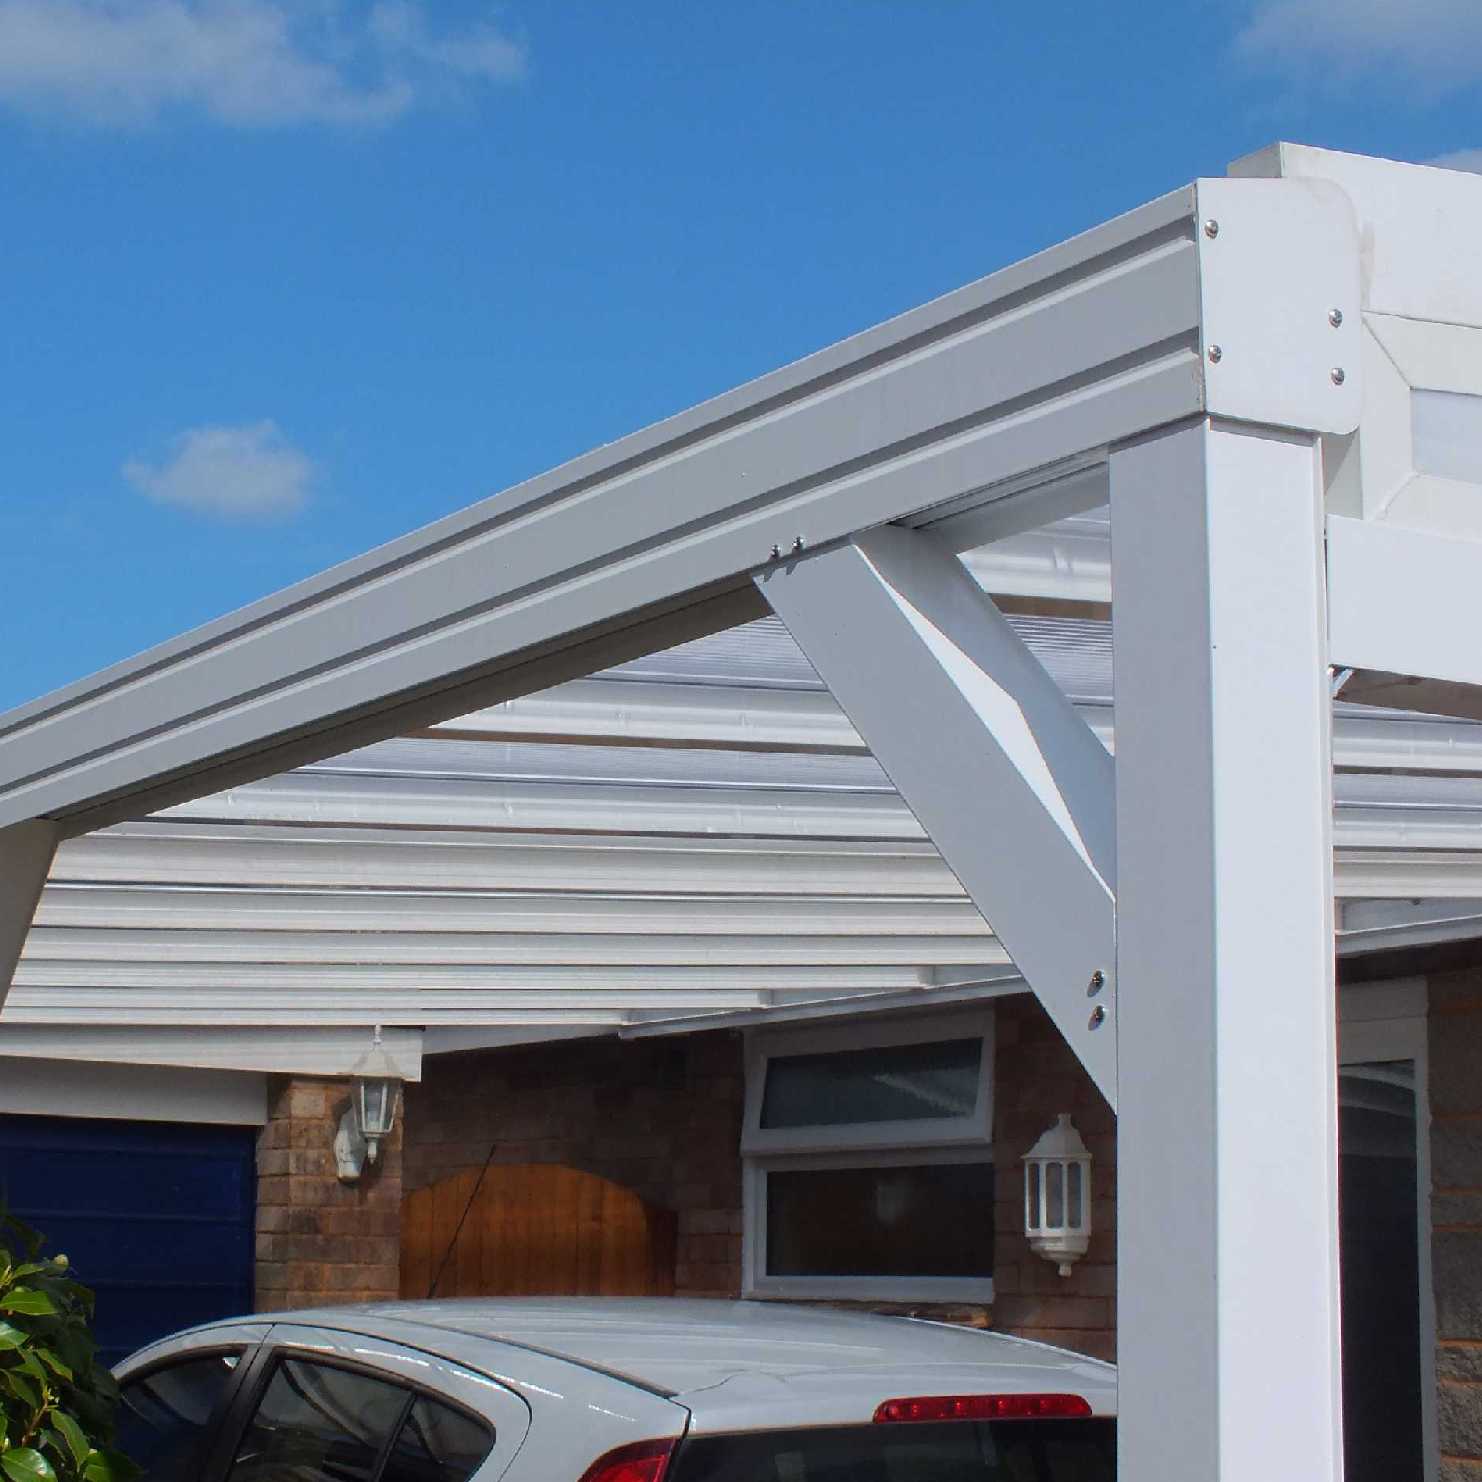 Great deals on Omega Smart Lean-To Canopy, White with 16mm Polycarbonate Glazing - 7.0m (W) x 4.5m (P), (4) Supporting Posts